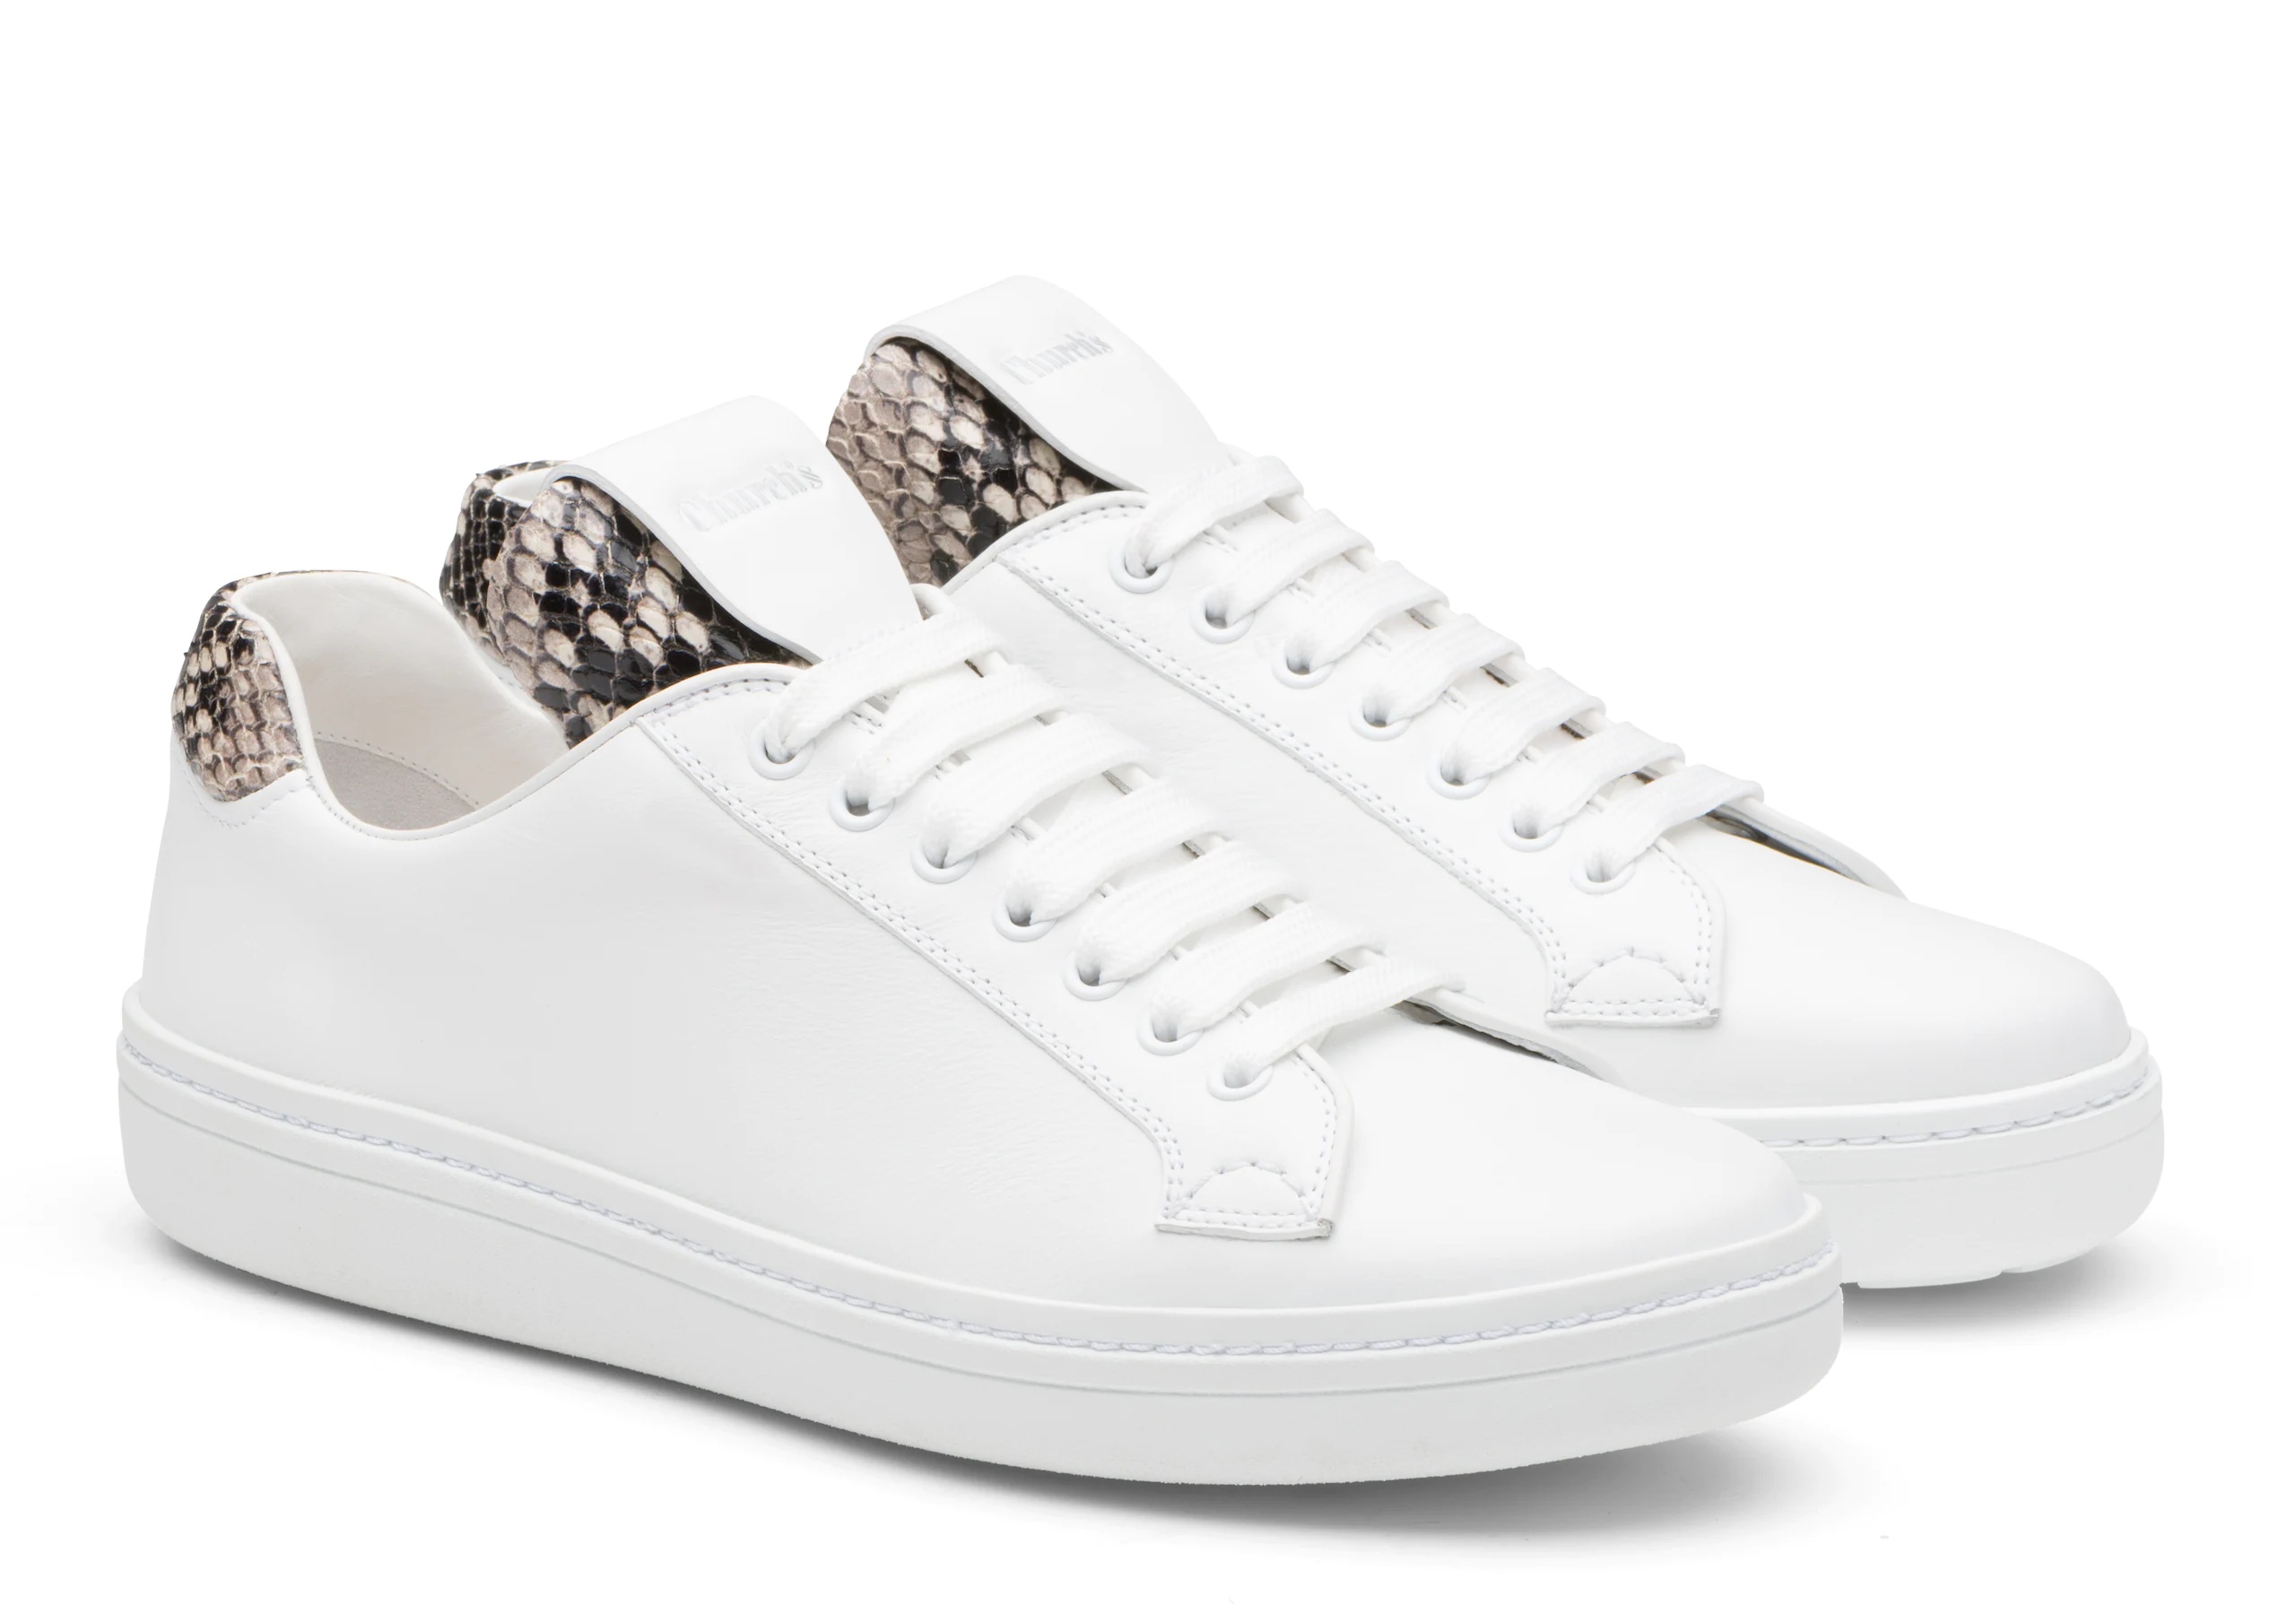 Boland
Calf Leather and Python Classic Sneaker White/beige - 2